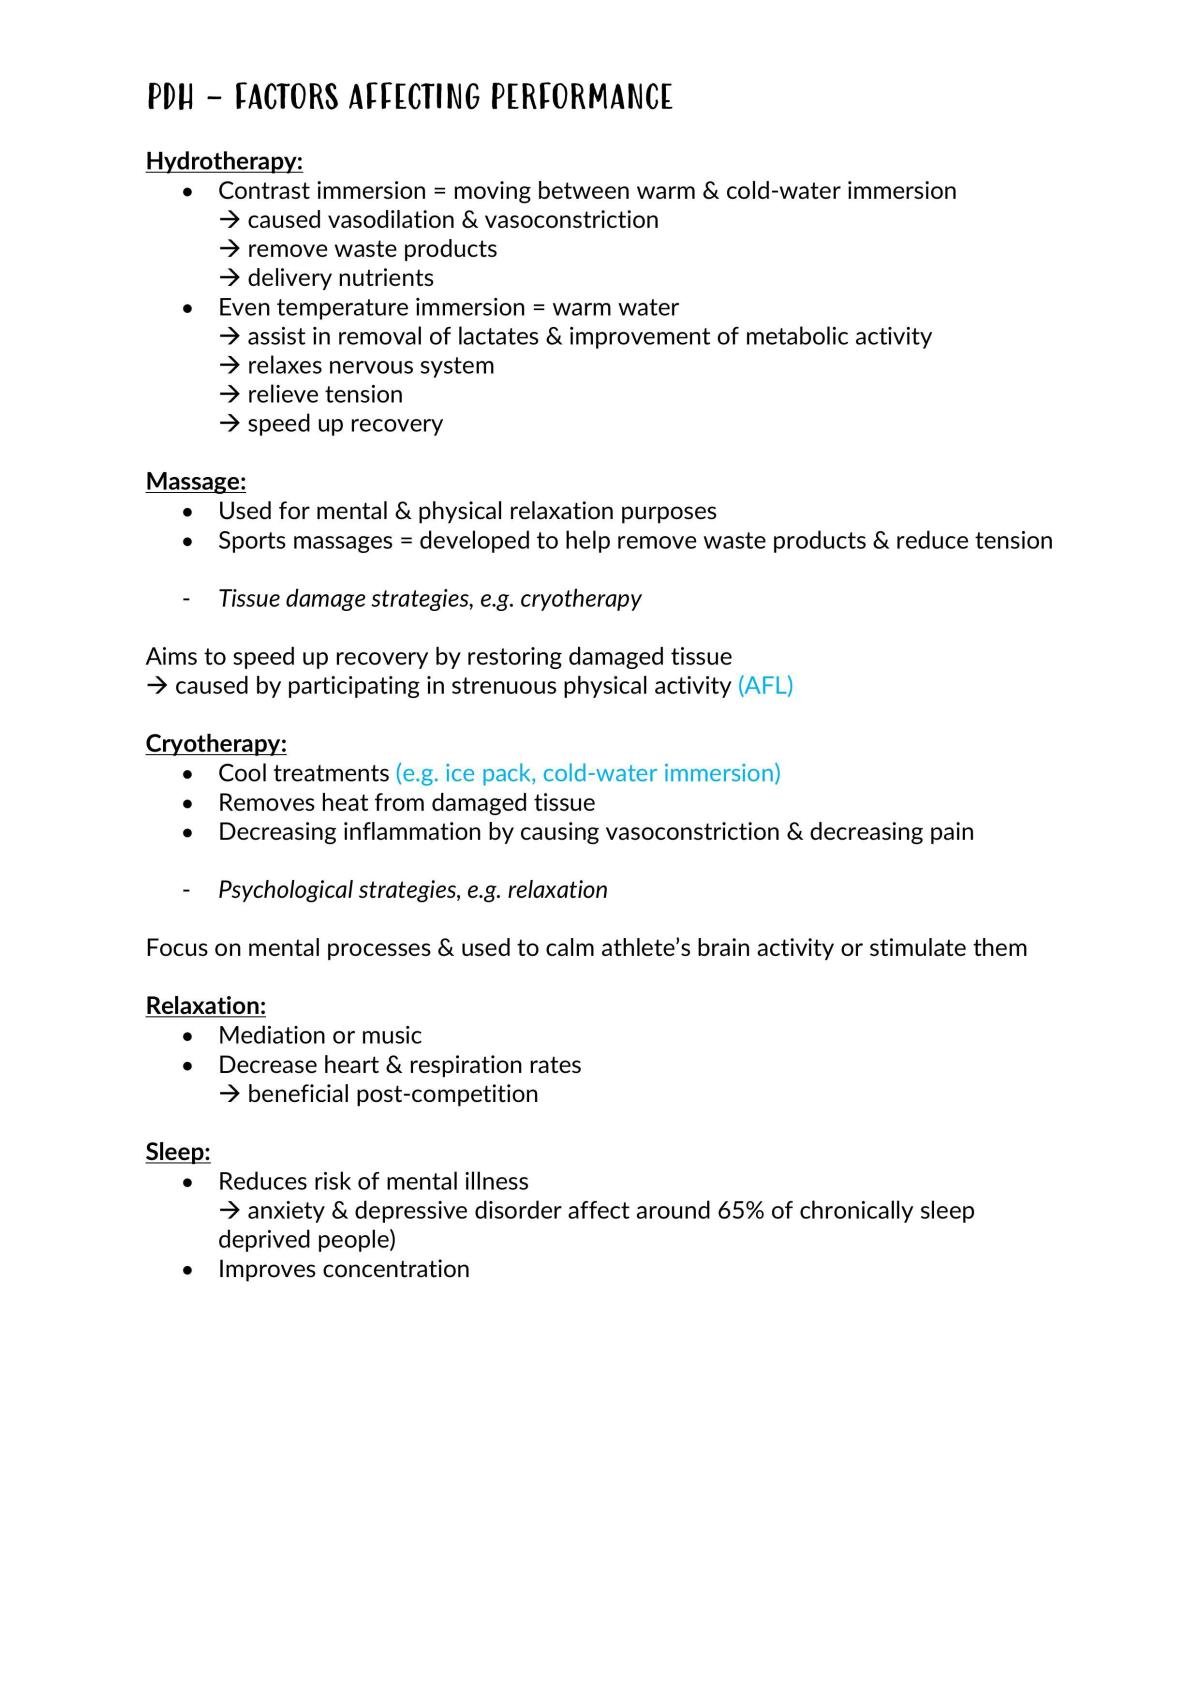 Factors Affecting Performance - Complete Notes - Page 25